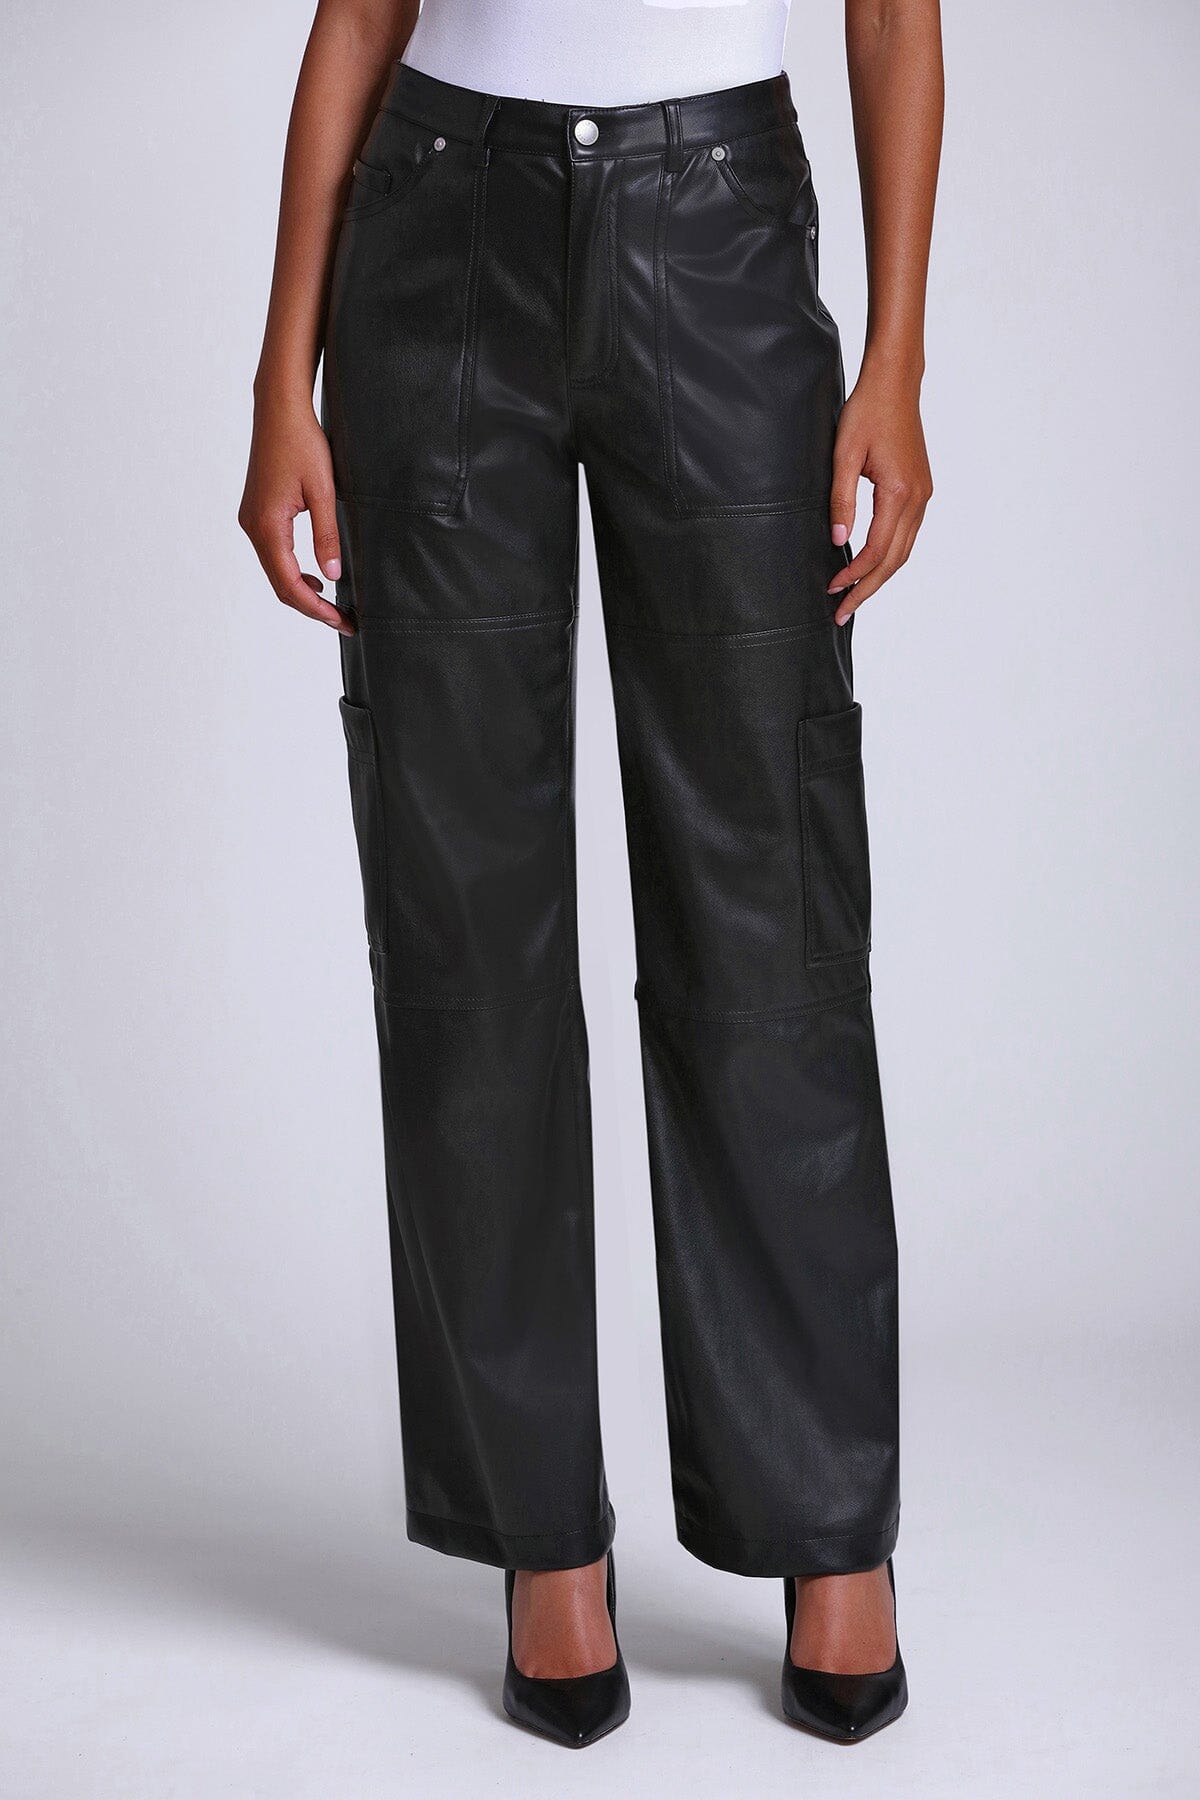 black faux ever leather wide leg cargo pant - women's figure flattering designer fashion day to night pants